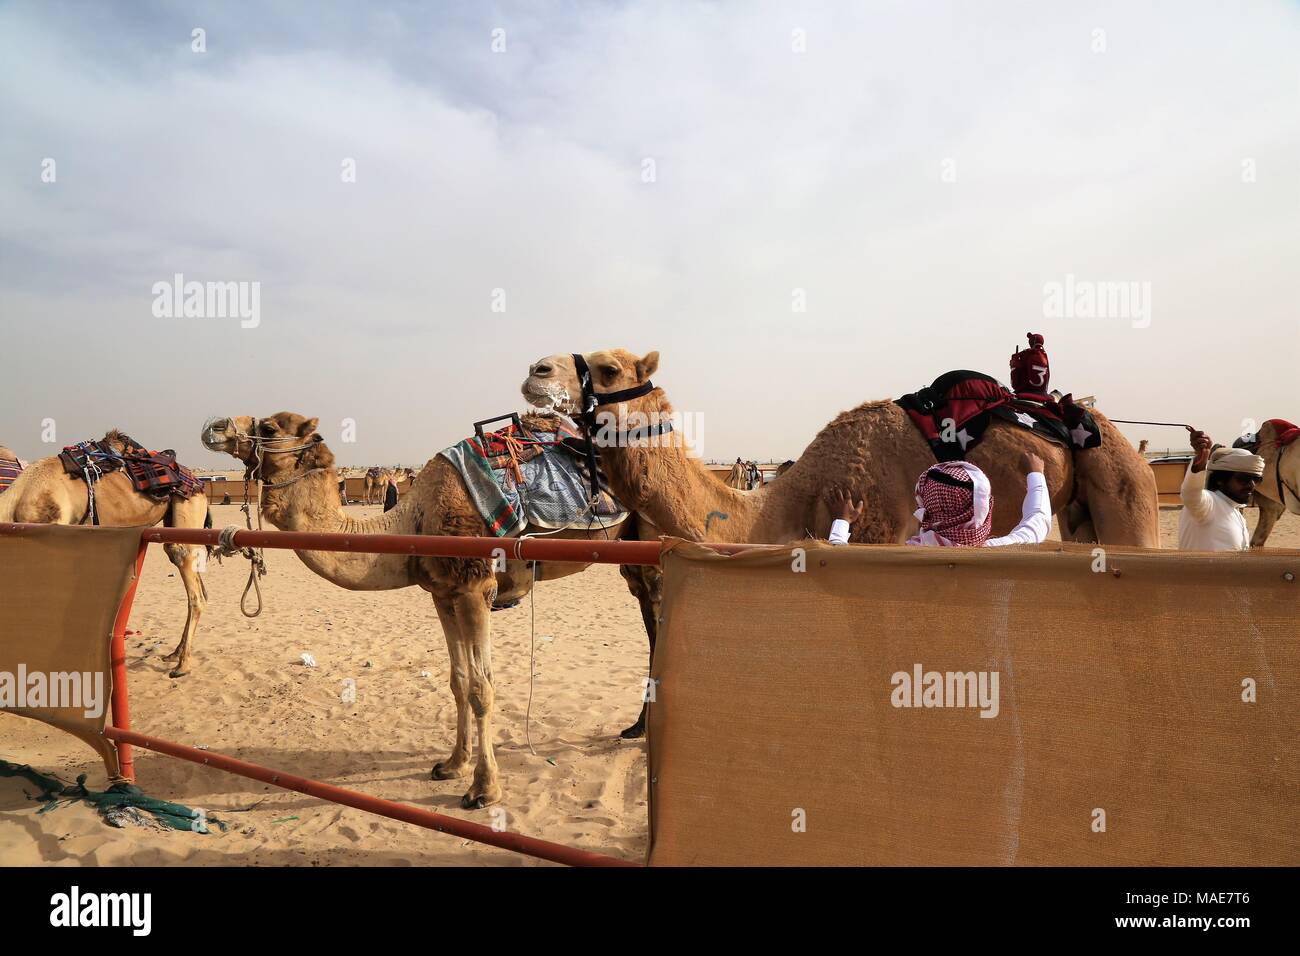 Kuwait City. 31st Mar, 2018. Photo taken on March 31, 2018 shows racing camels waiting for the competition in Al Ahmadi Governorate in the South of Kuwait. Camel race is a highly popular fiercely competitive sporting event in Kuwait, it takes place on Saturdays between October and April in Al Ahmadi Governorate in the South of Kuwait. Credit: Nie Yunpeng/Xinhua/Alamy Live News Stock Photo